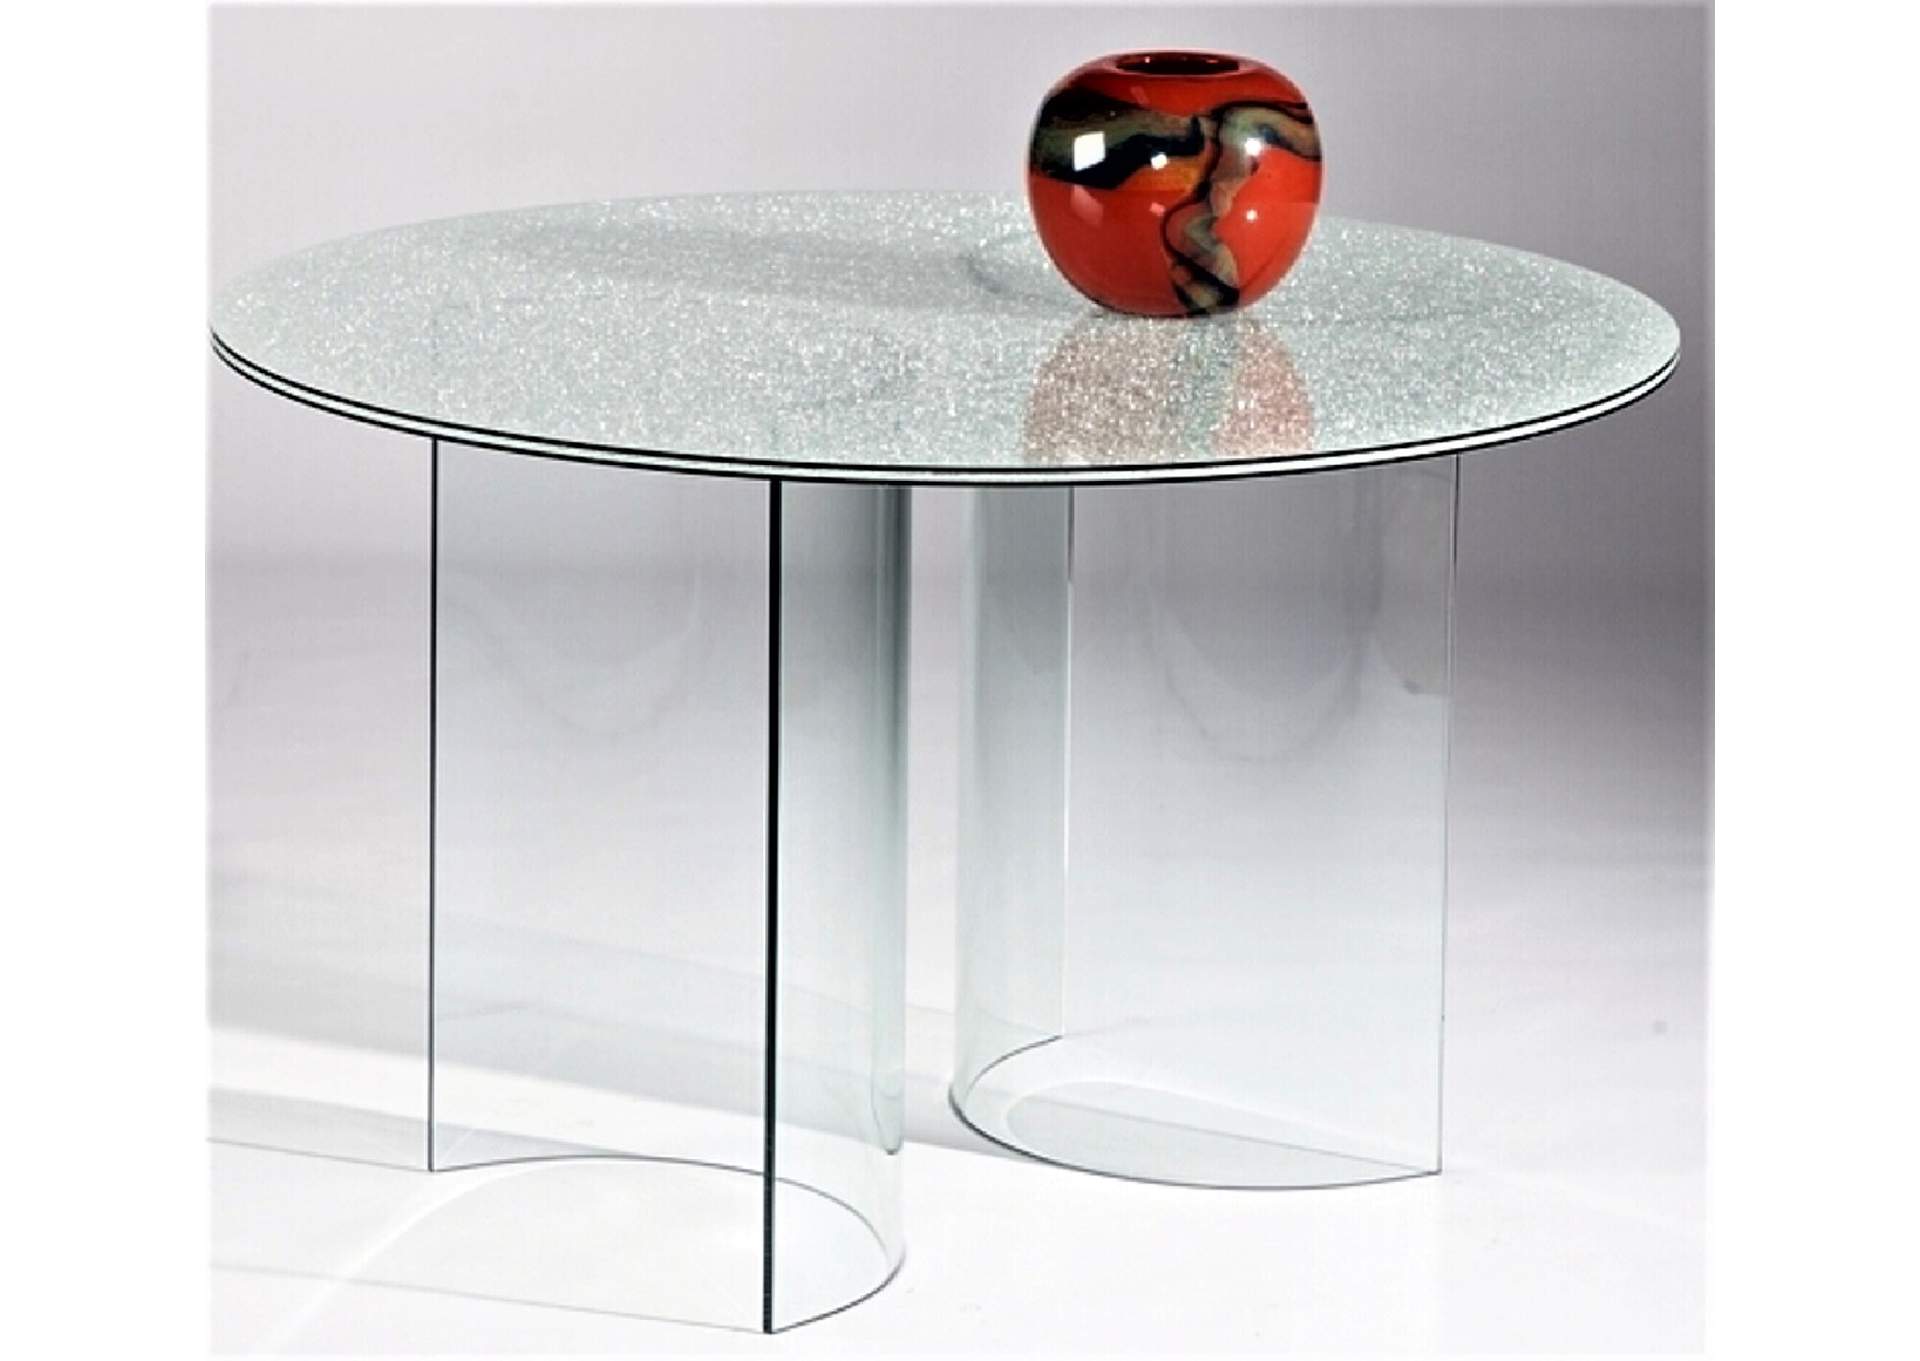 Cbase Clear Contemporary Round Crackled Glass Dining Table,Chintaly Imports